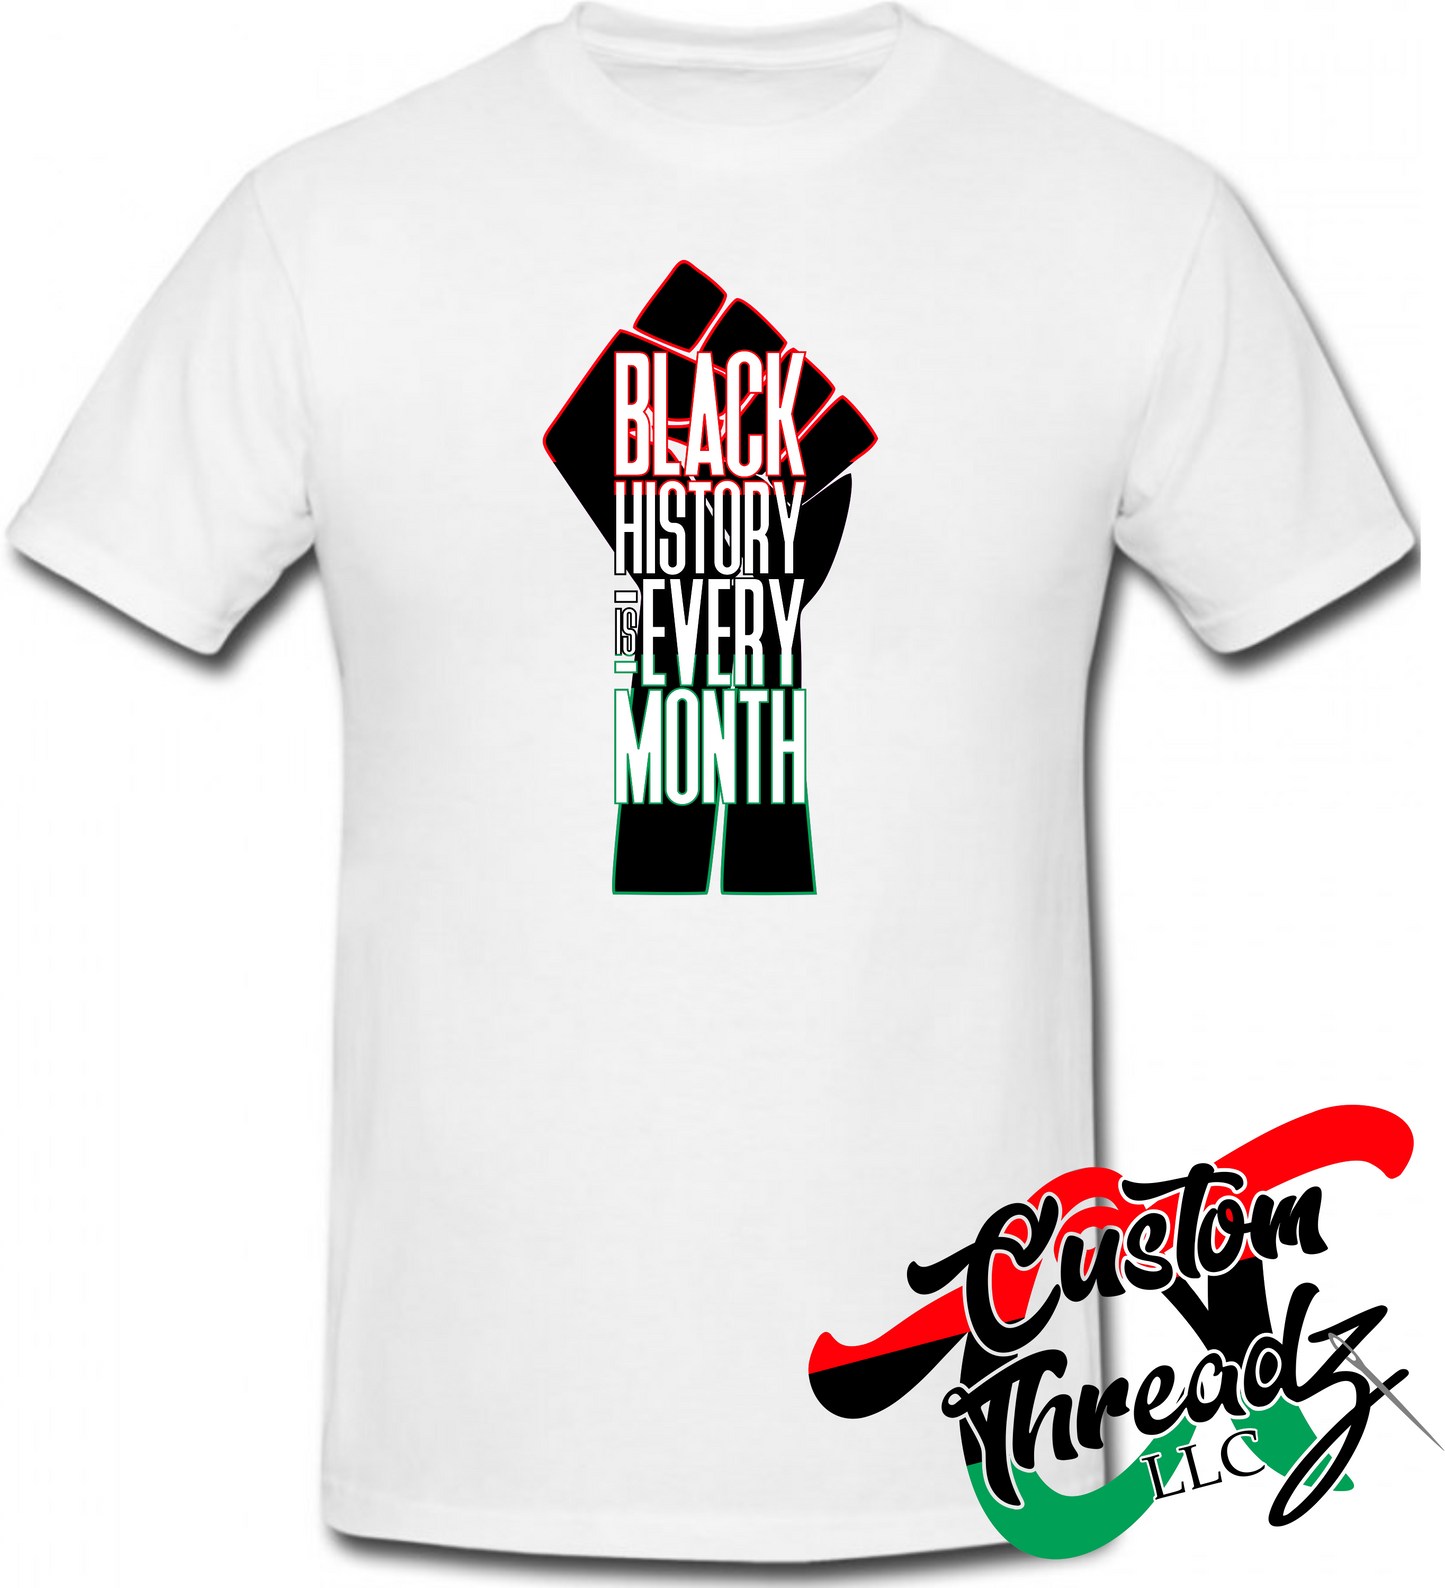 white tee with black history is every month DTG printed design